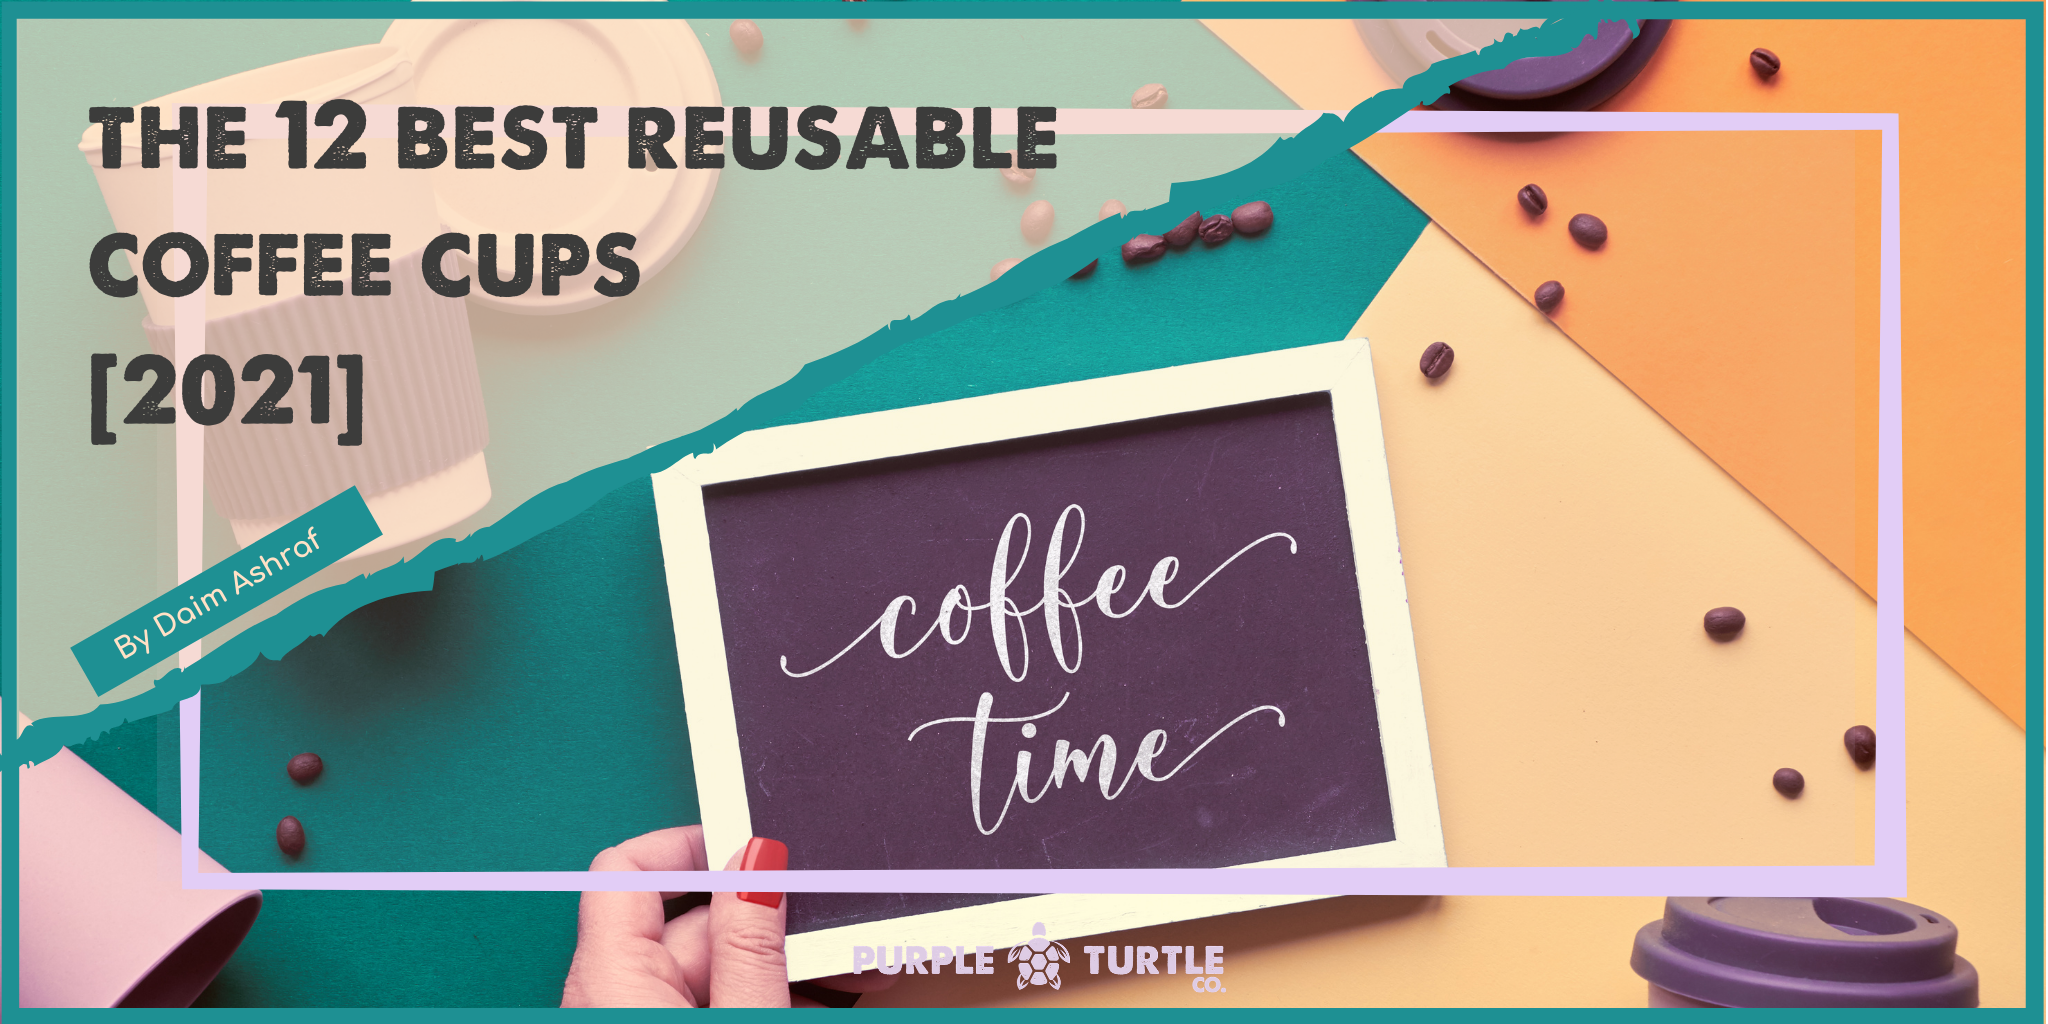 https://cdn.shopify.com/s/files/1/0024/0264/8139/files/Why_You_Need_Reusable_Cup__Banner_5_2048x2048.png?v=1607967233